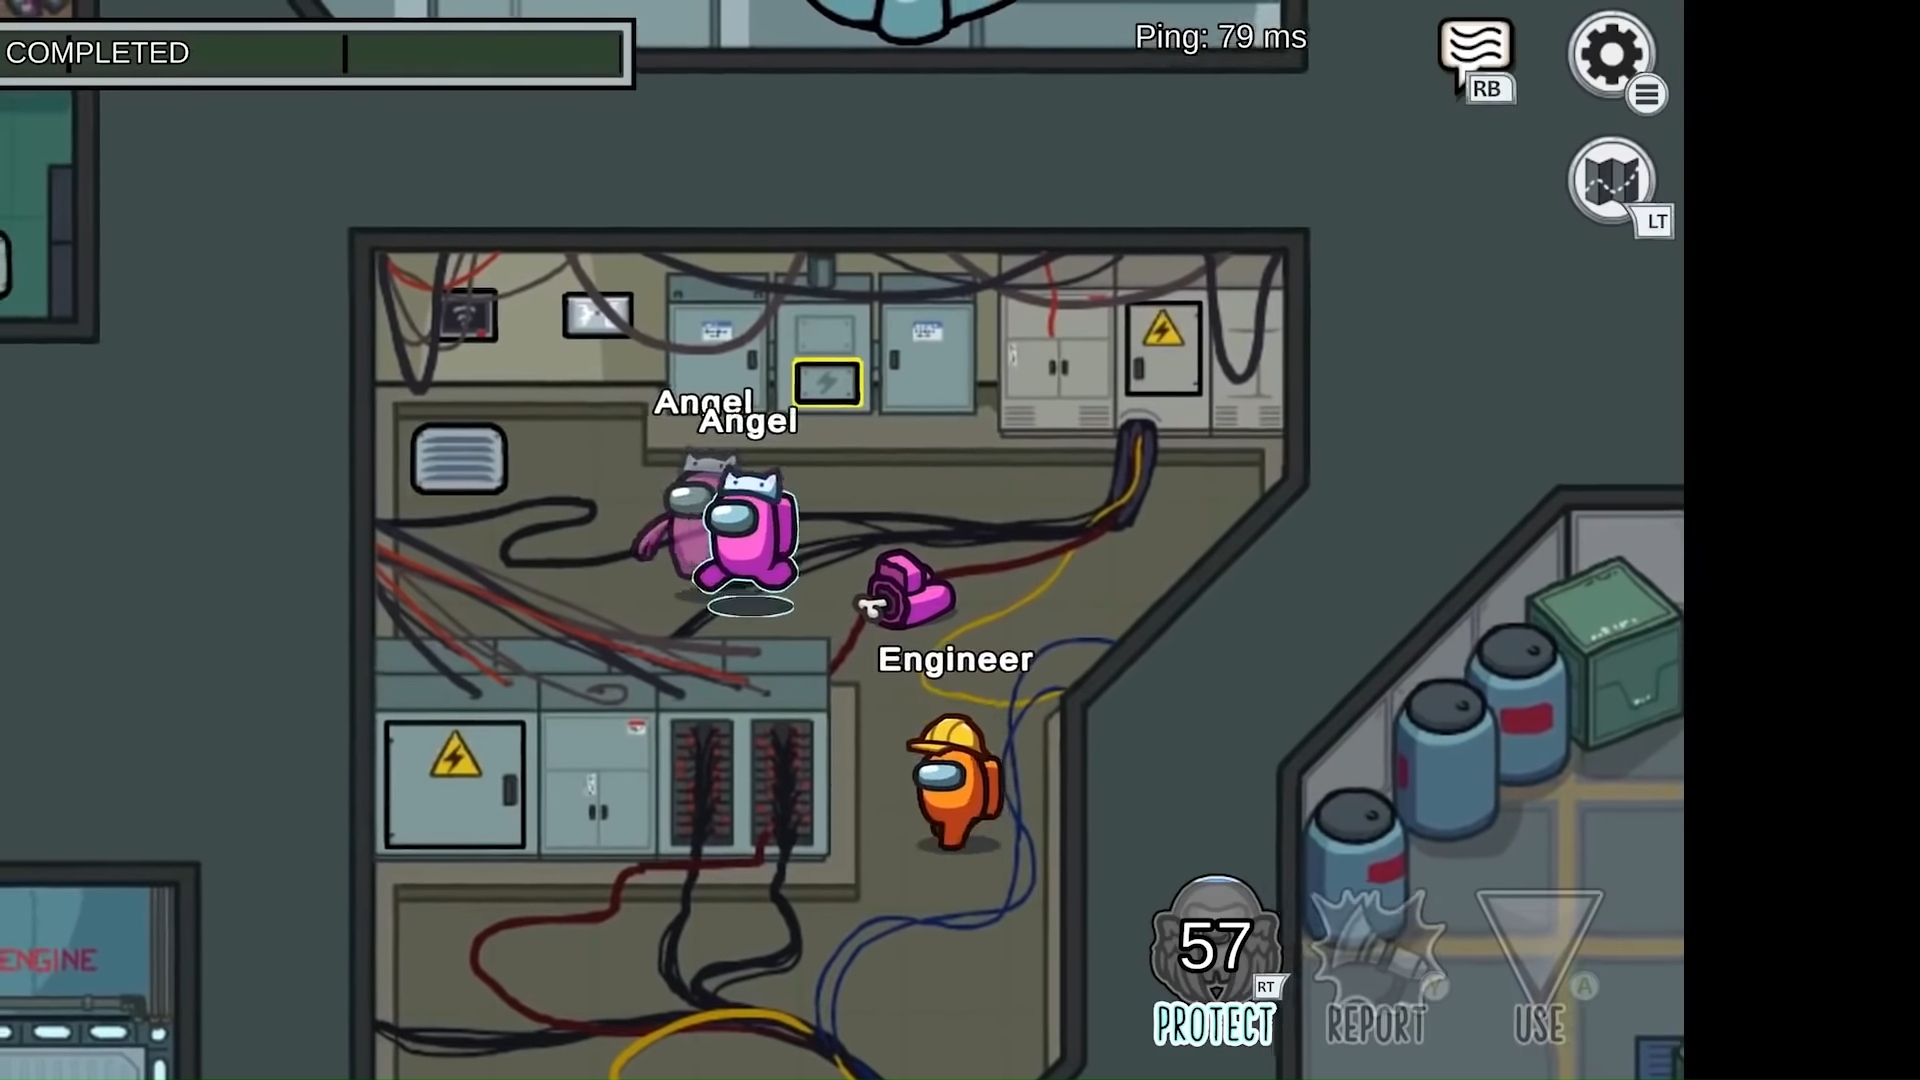 Addictive games - Among Us. A screenshot shows a selection of astronauts aboard their ship.